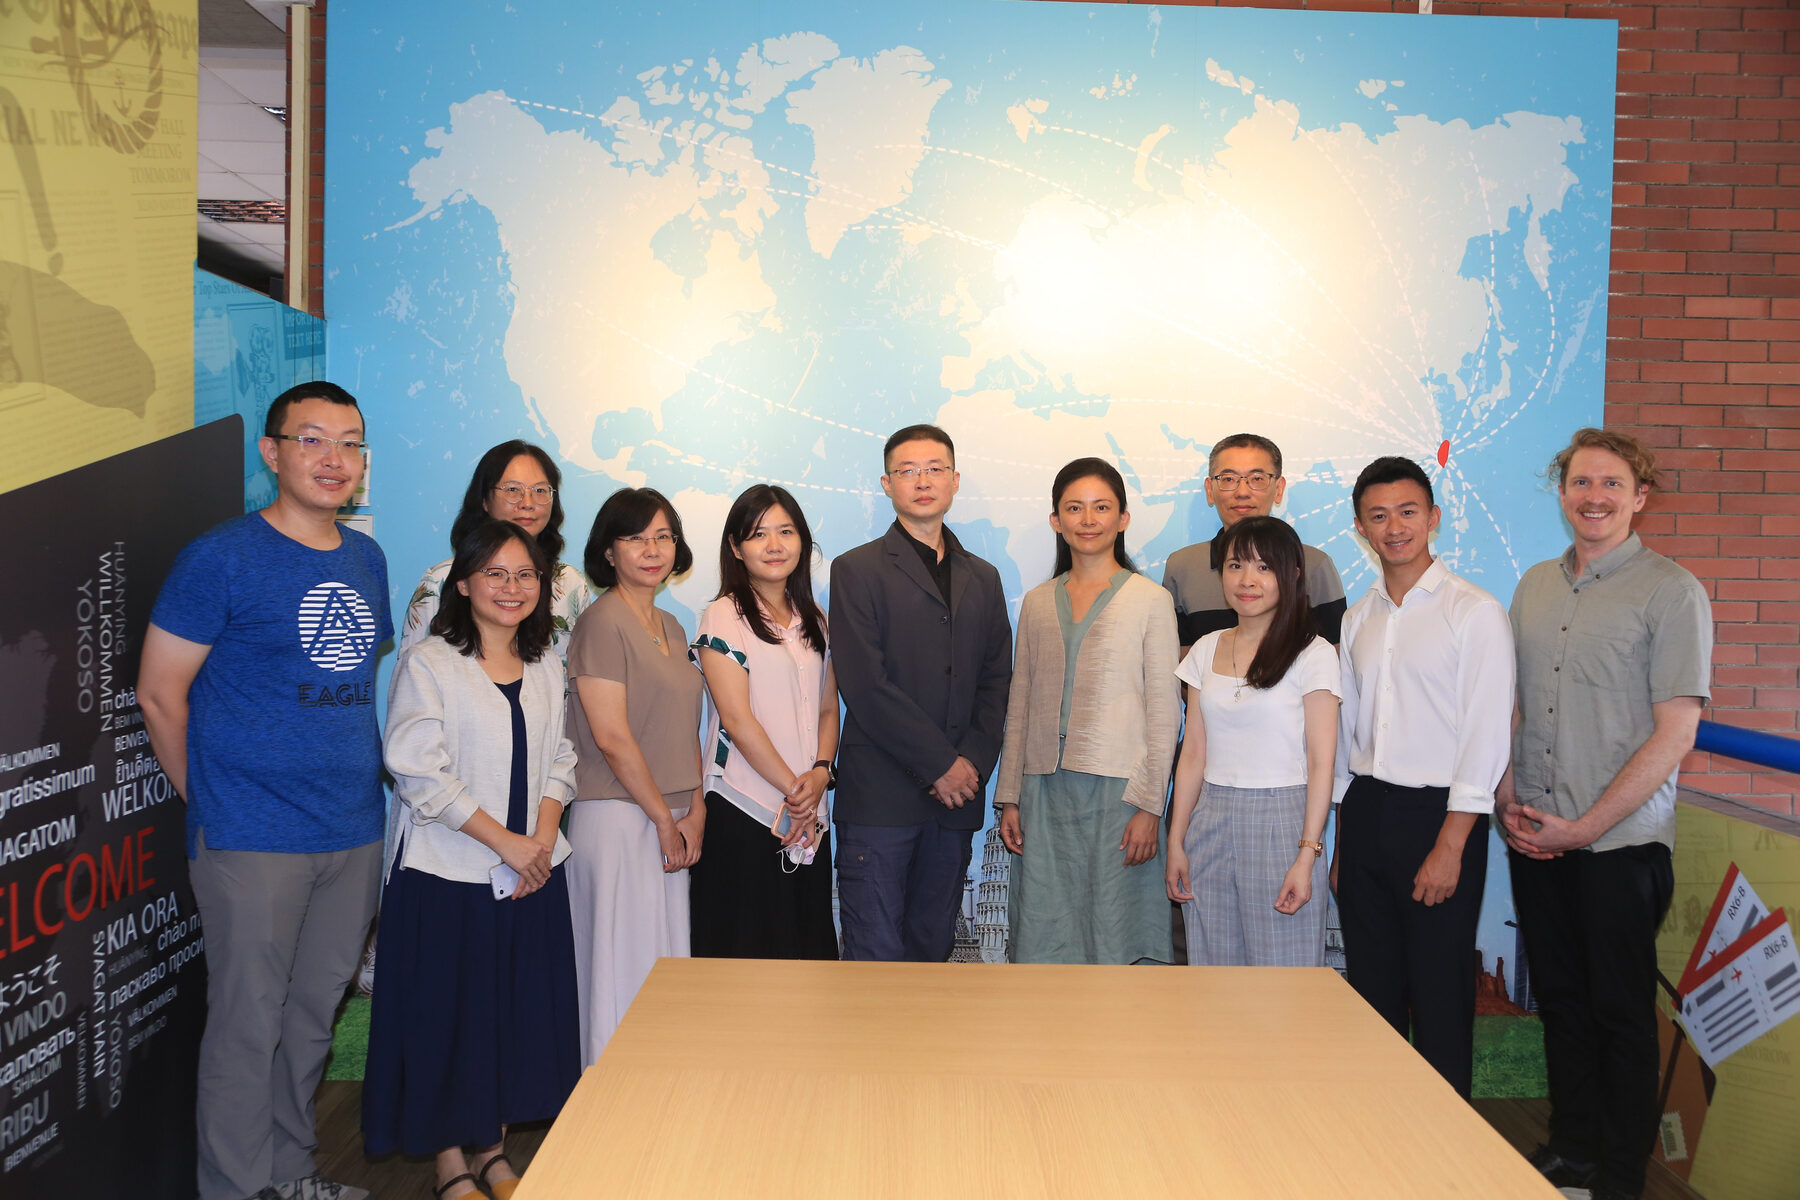 Group photo of members of NSYSU’s Institute of Education, Center for Teacher Education, and International Graduate Program of Education and Human Development.